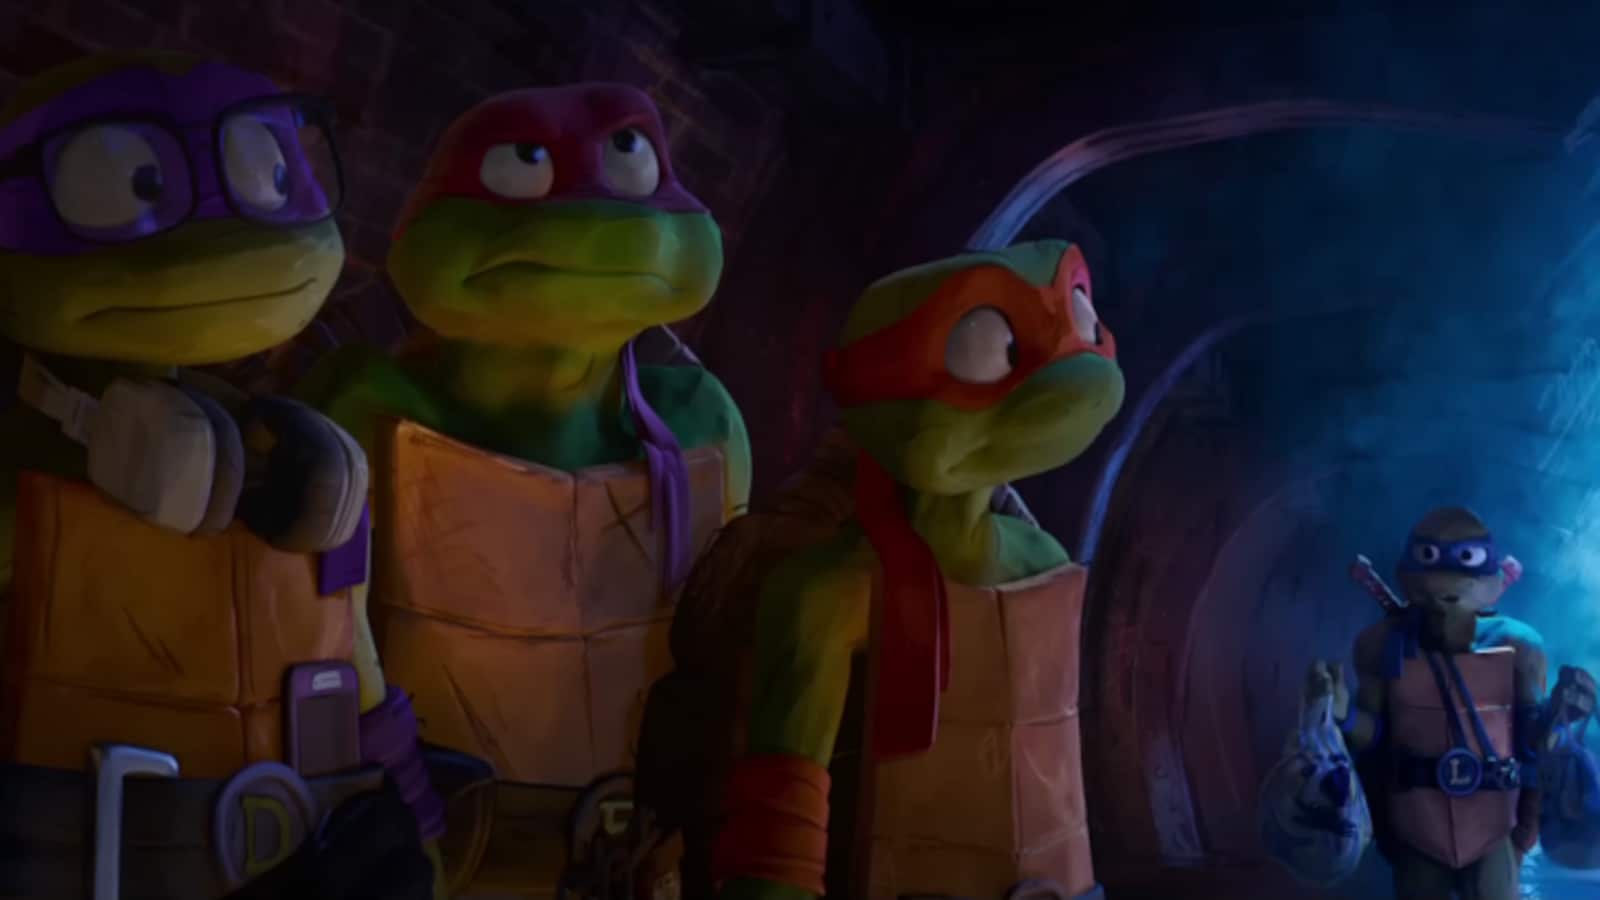 https://images.moneycontrol.com/static-mcnews/2023/06/Teenage-Mutant-Ninja-Turtles-Mutant-Mayhem-is-slated-for-release-on-August-2-2023-Screen-grab-from-trailer-by-Paramount-Pictures-770x389.png?impolicy=website&width=1600&height=900